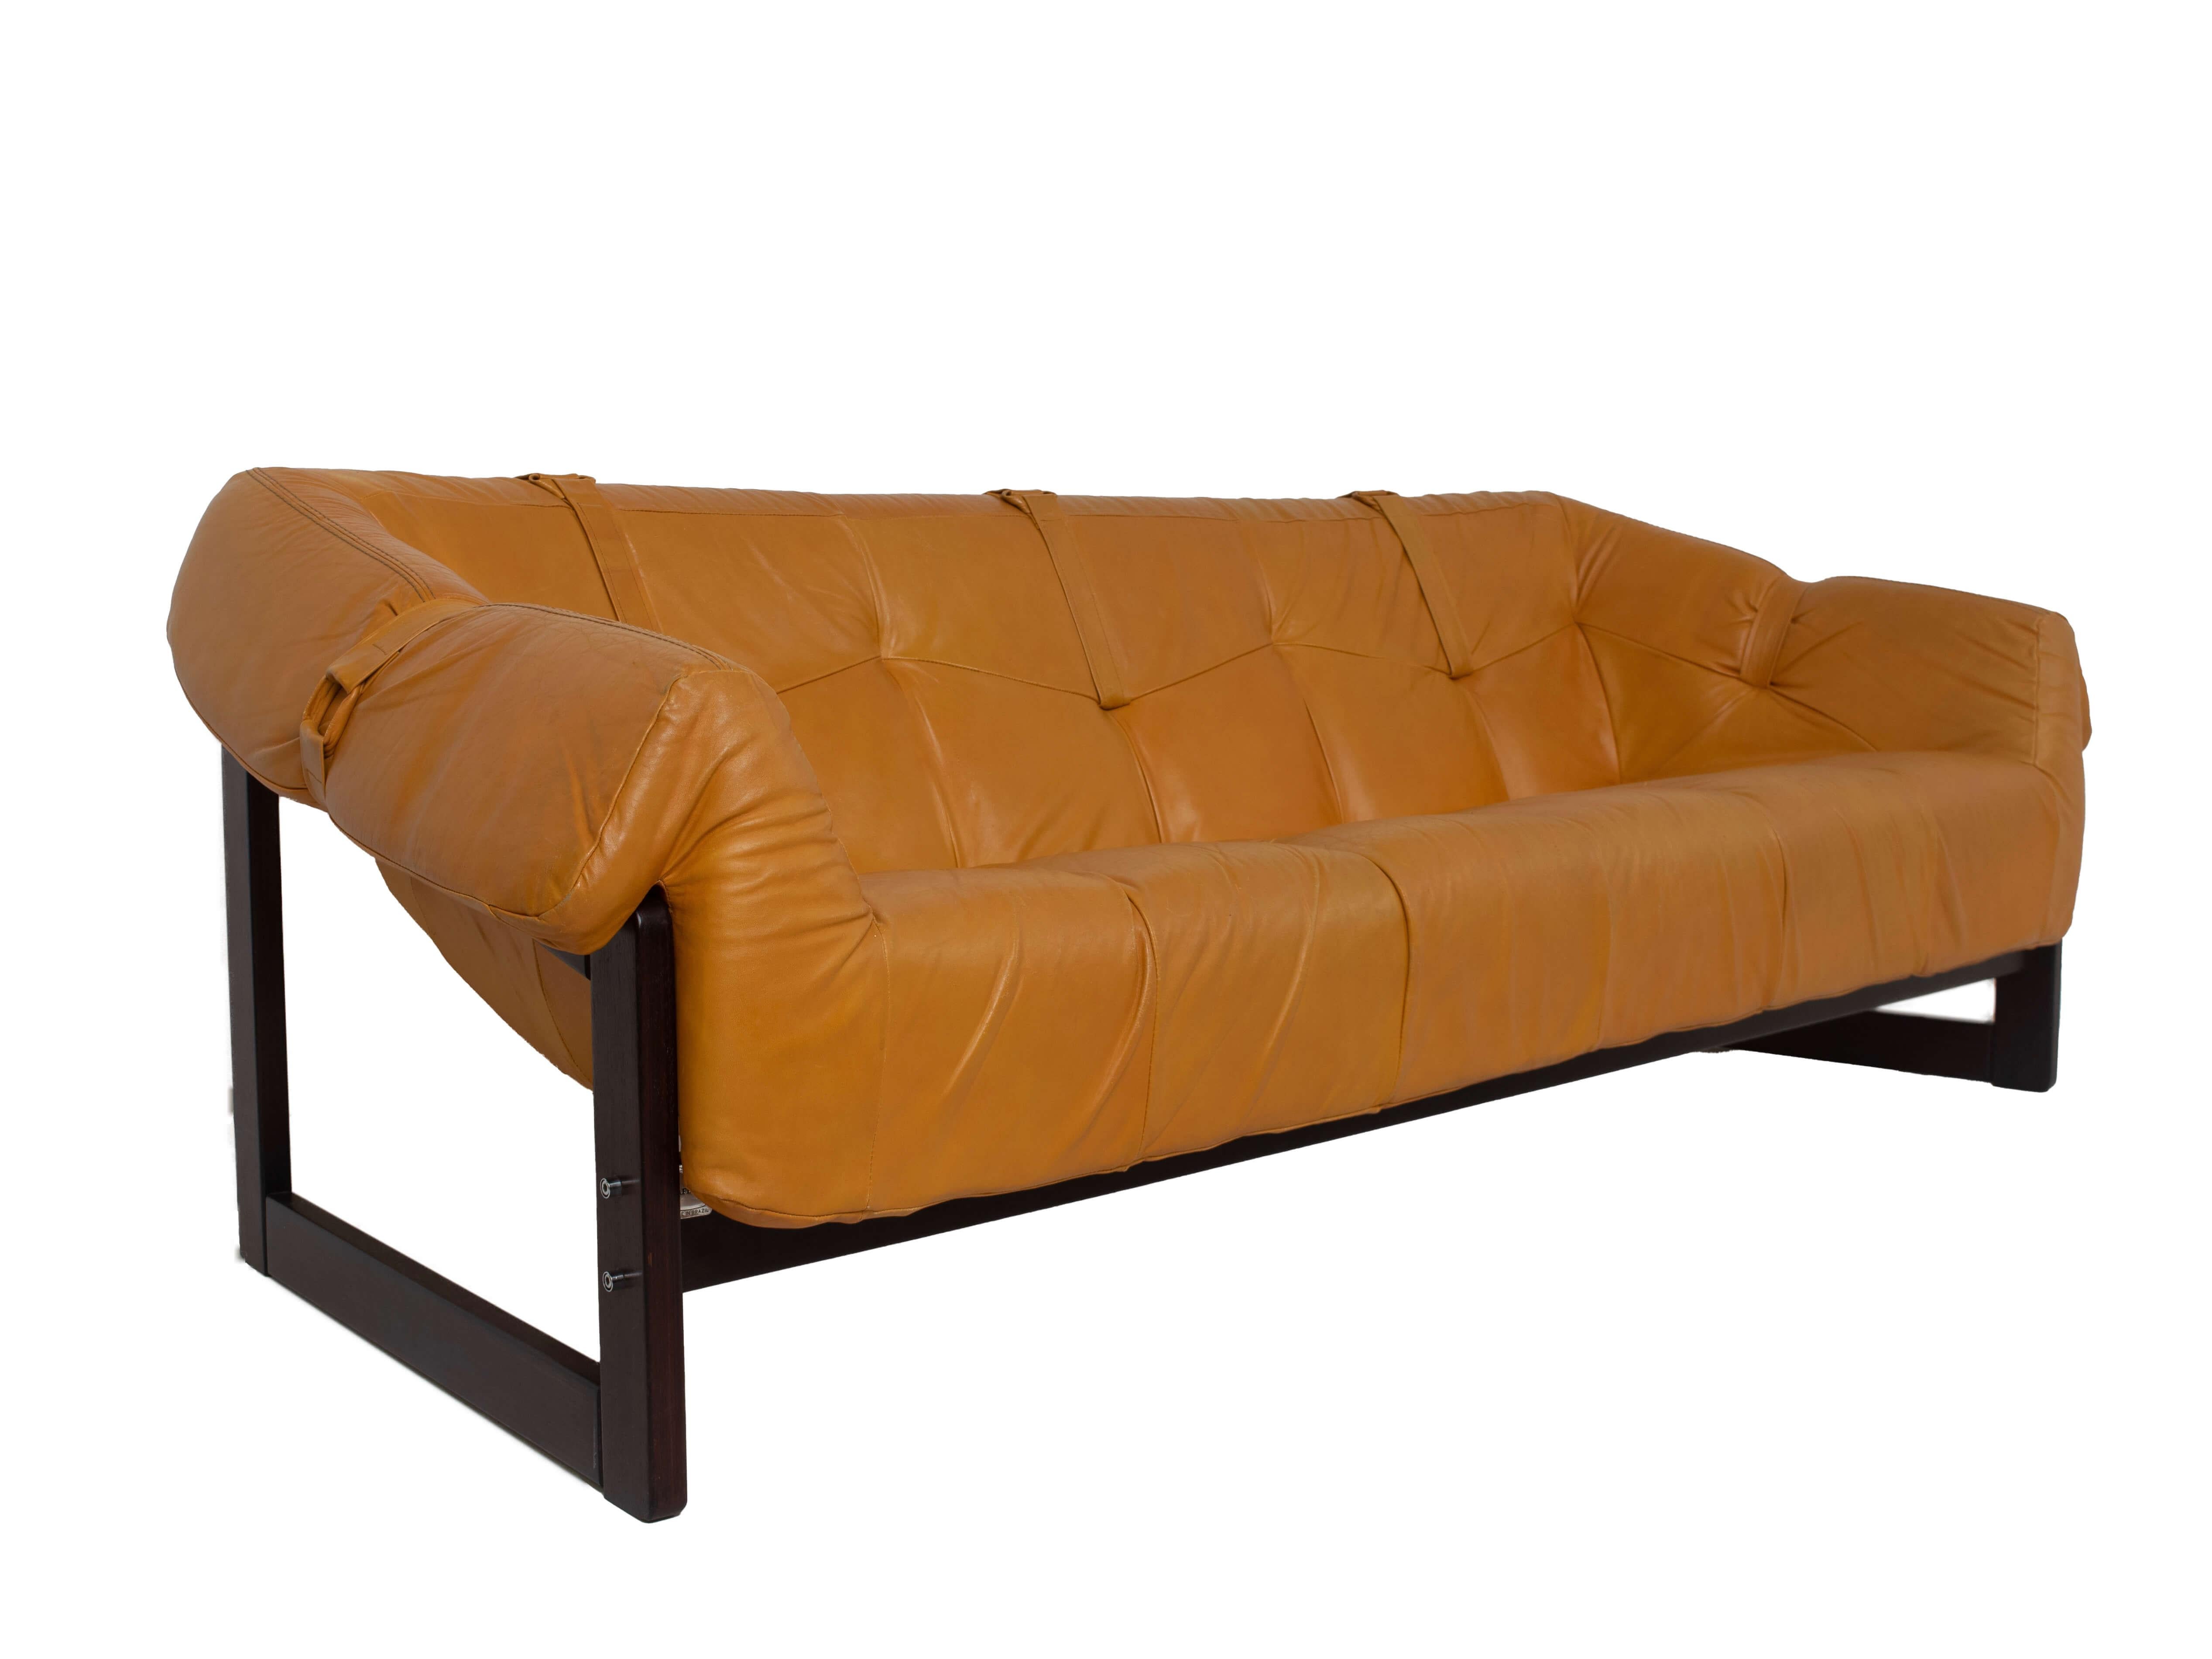 Percival Lafer three-seater sofa MP-091 in leather and hardwood, Brazil 1960s. The custard yellow leather and the shape of the frame, makes this sofa stand out and an eye-catcher for your interior.

This sofa is comfortable and in good condition